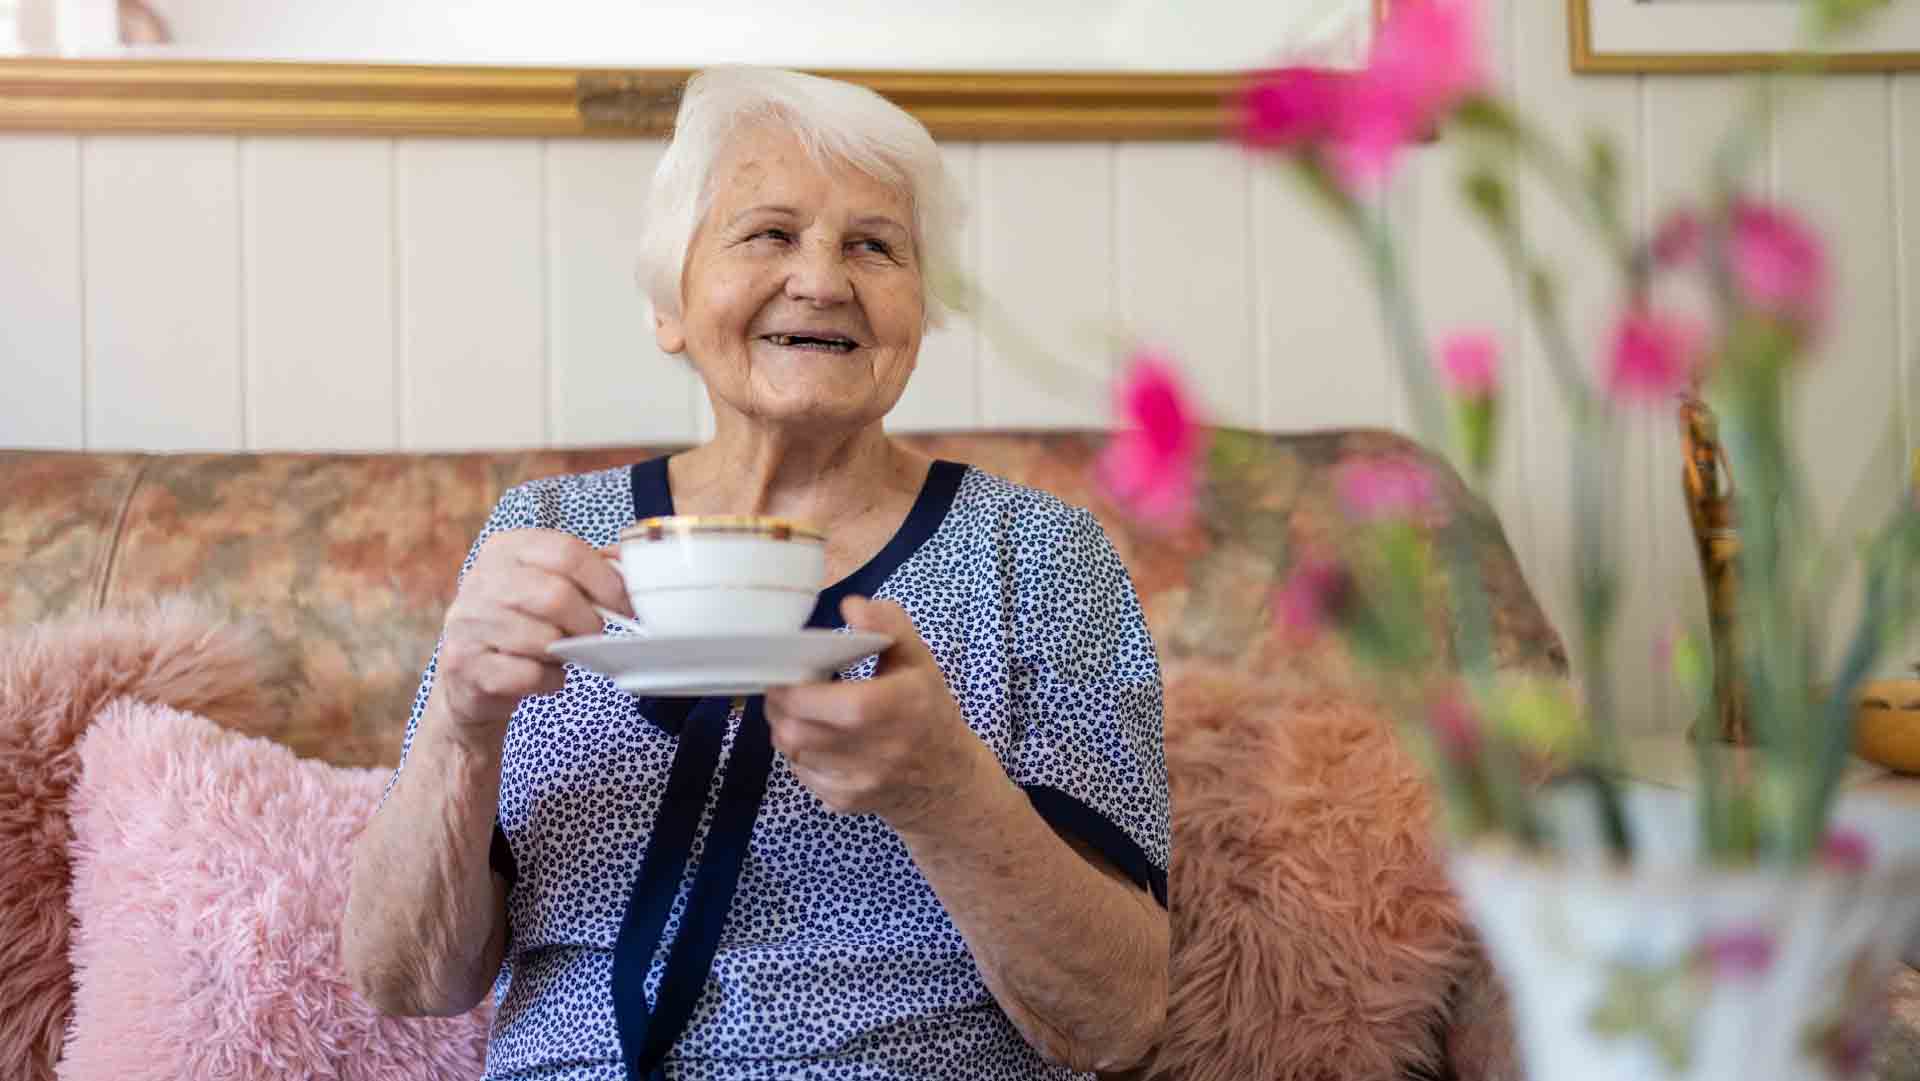 An image of an older adult to rep taking a cup of Coffee. It represents the aging population with dementia and Alzheimer's Disease. Drinking Coffee May prevent Alzheimer's Disease.